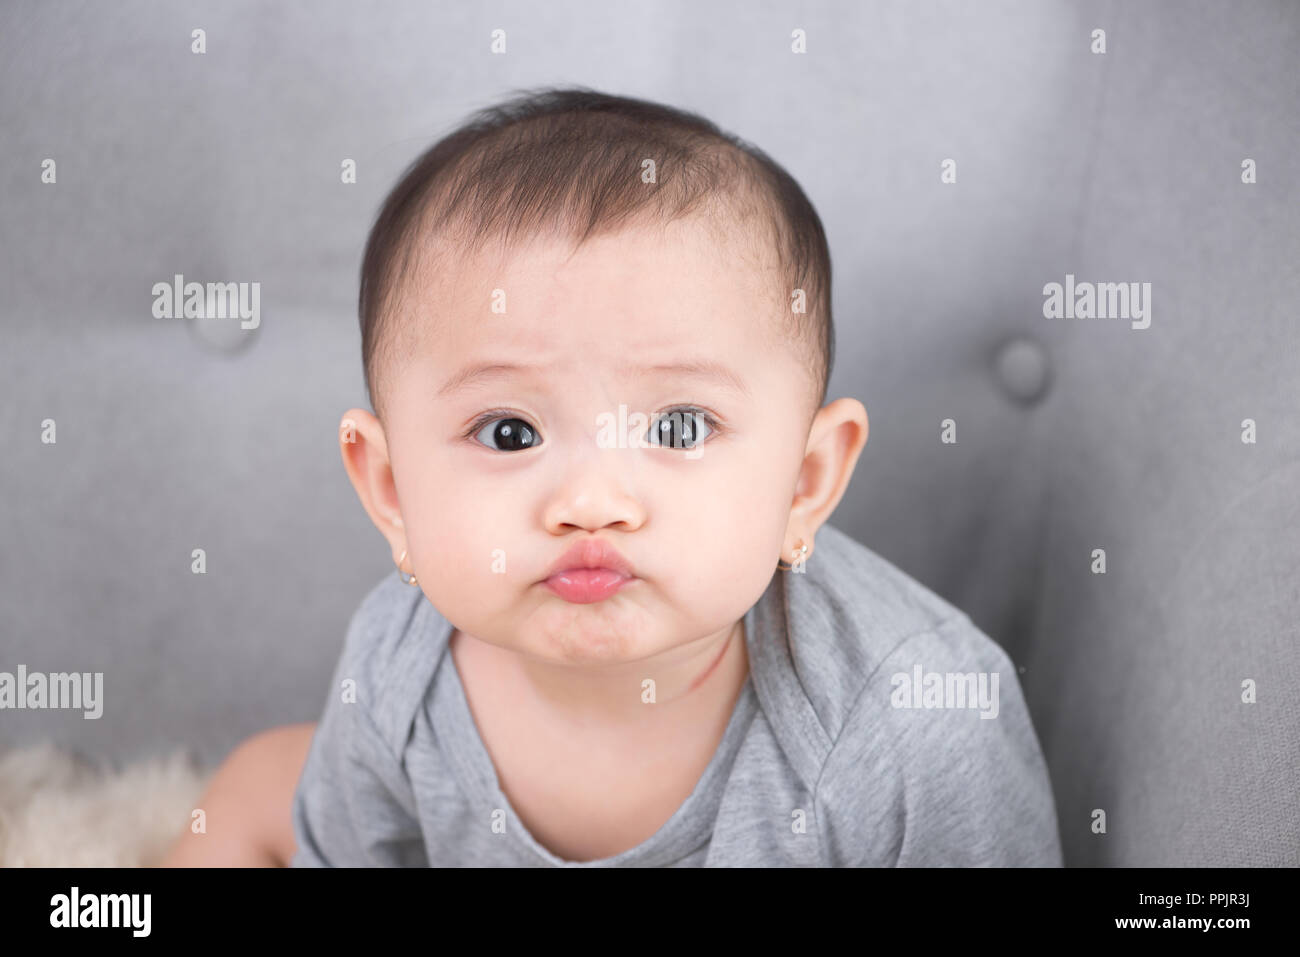 Image of sweet baby girl, closeup portrait of cute 8 month-old smiling girl, toddler. Stock Photo